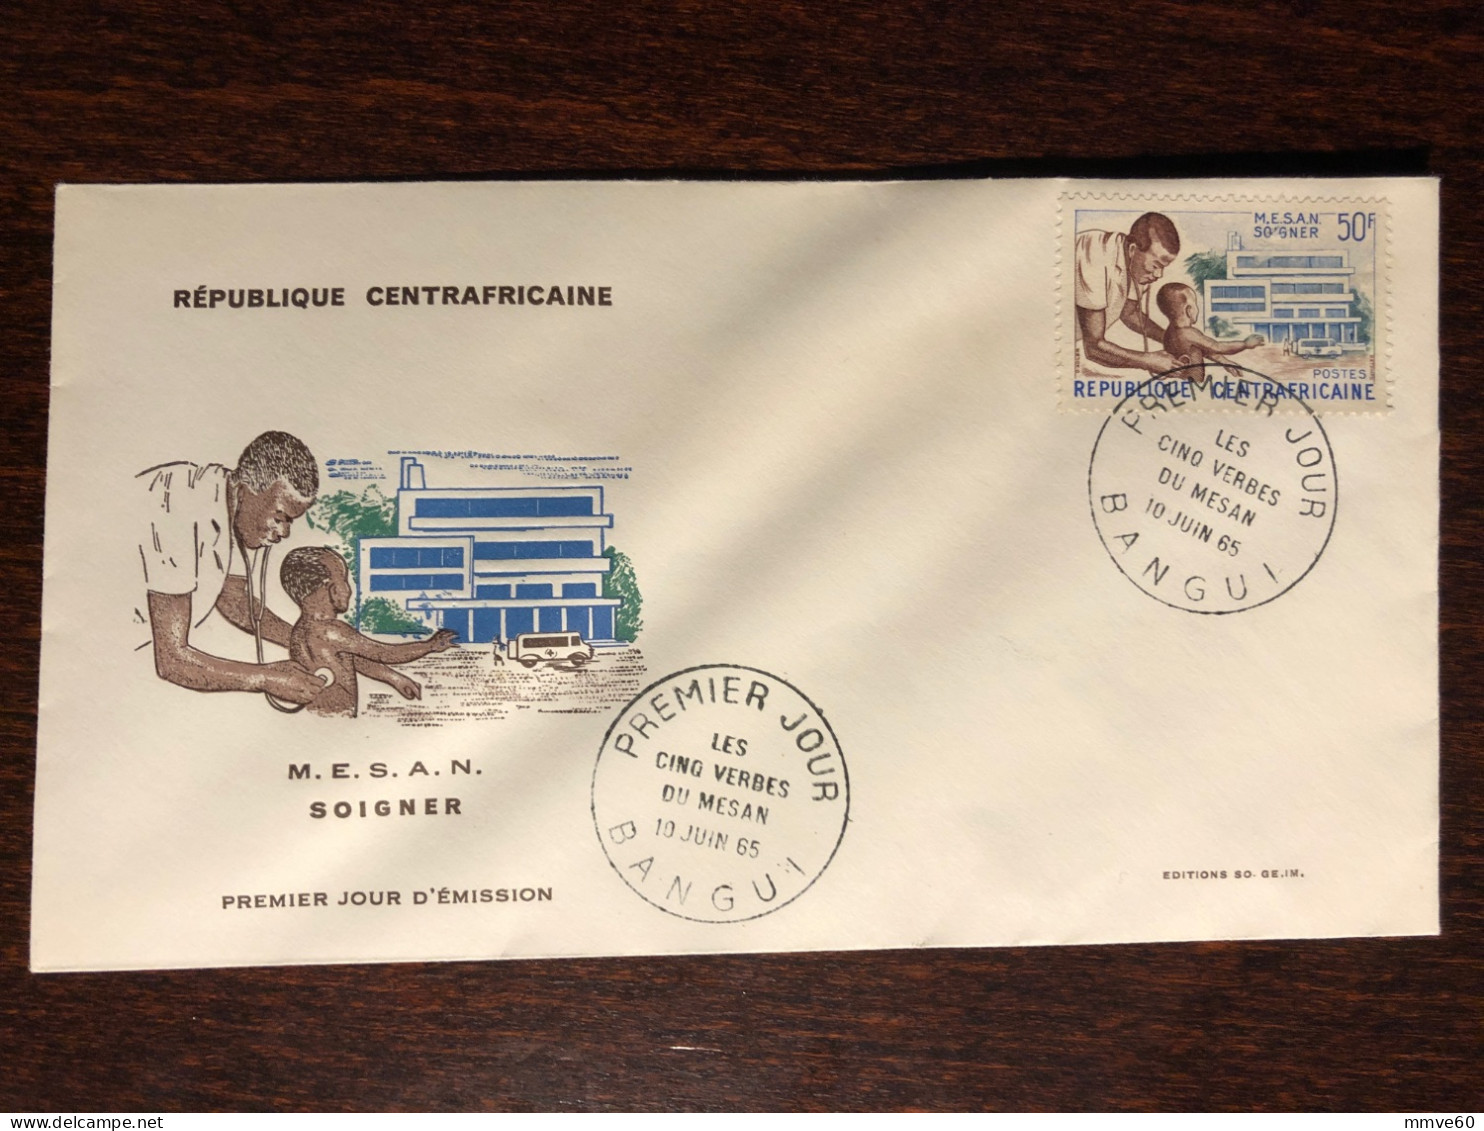 CENTRAFRICAINE CENTRAL AFRICA FDC COVER 1965 YEAR DOCTOR HOSPITAL HEALTH MEDICINE STAMPS - Repubblica Centroafricana